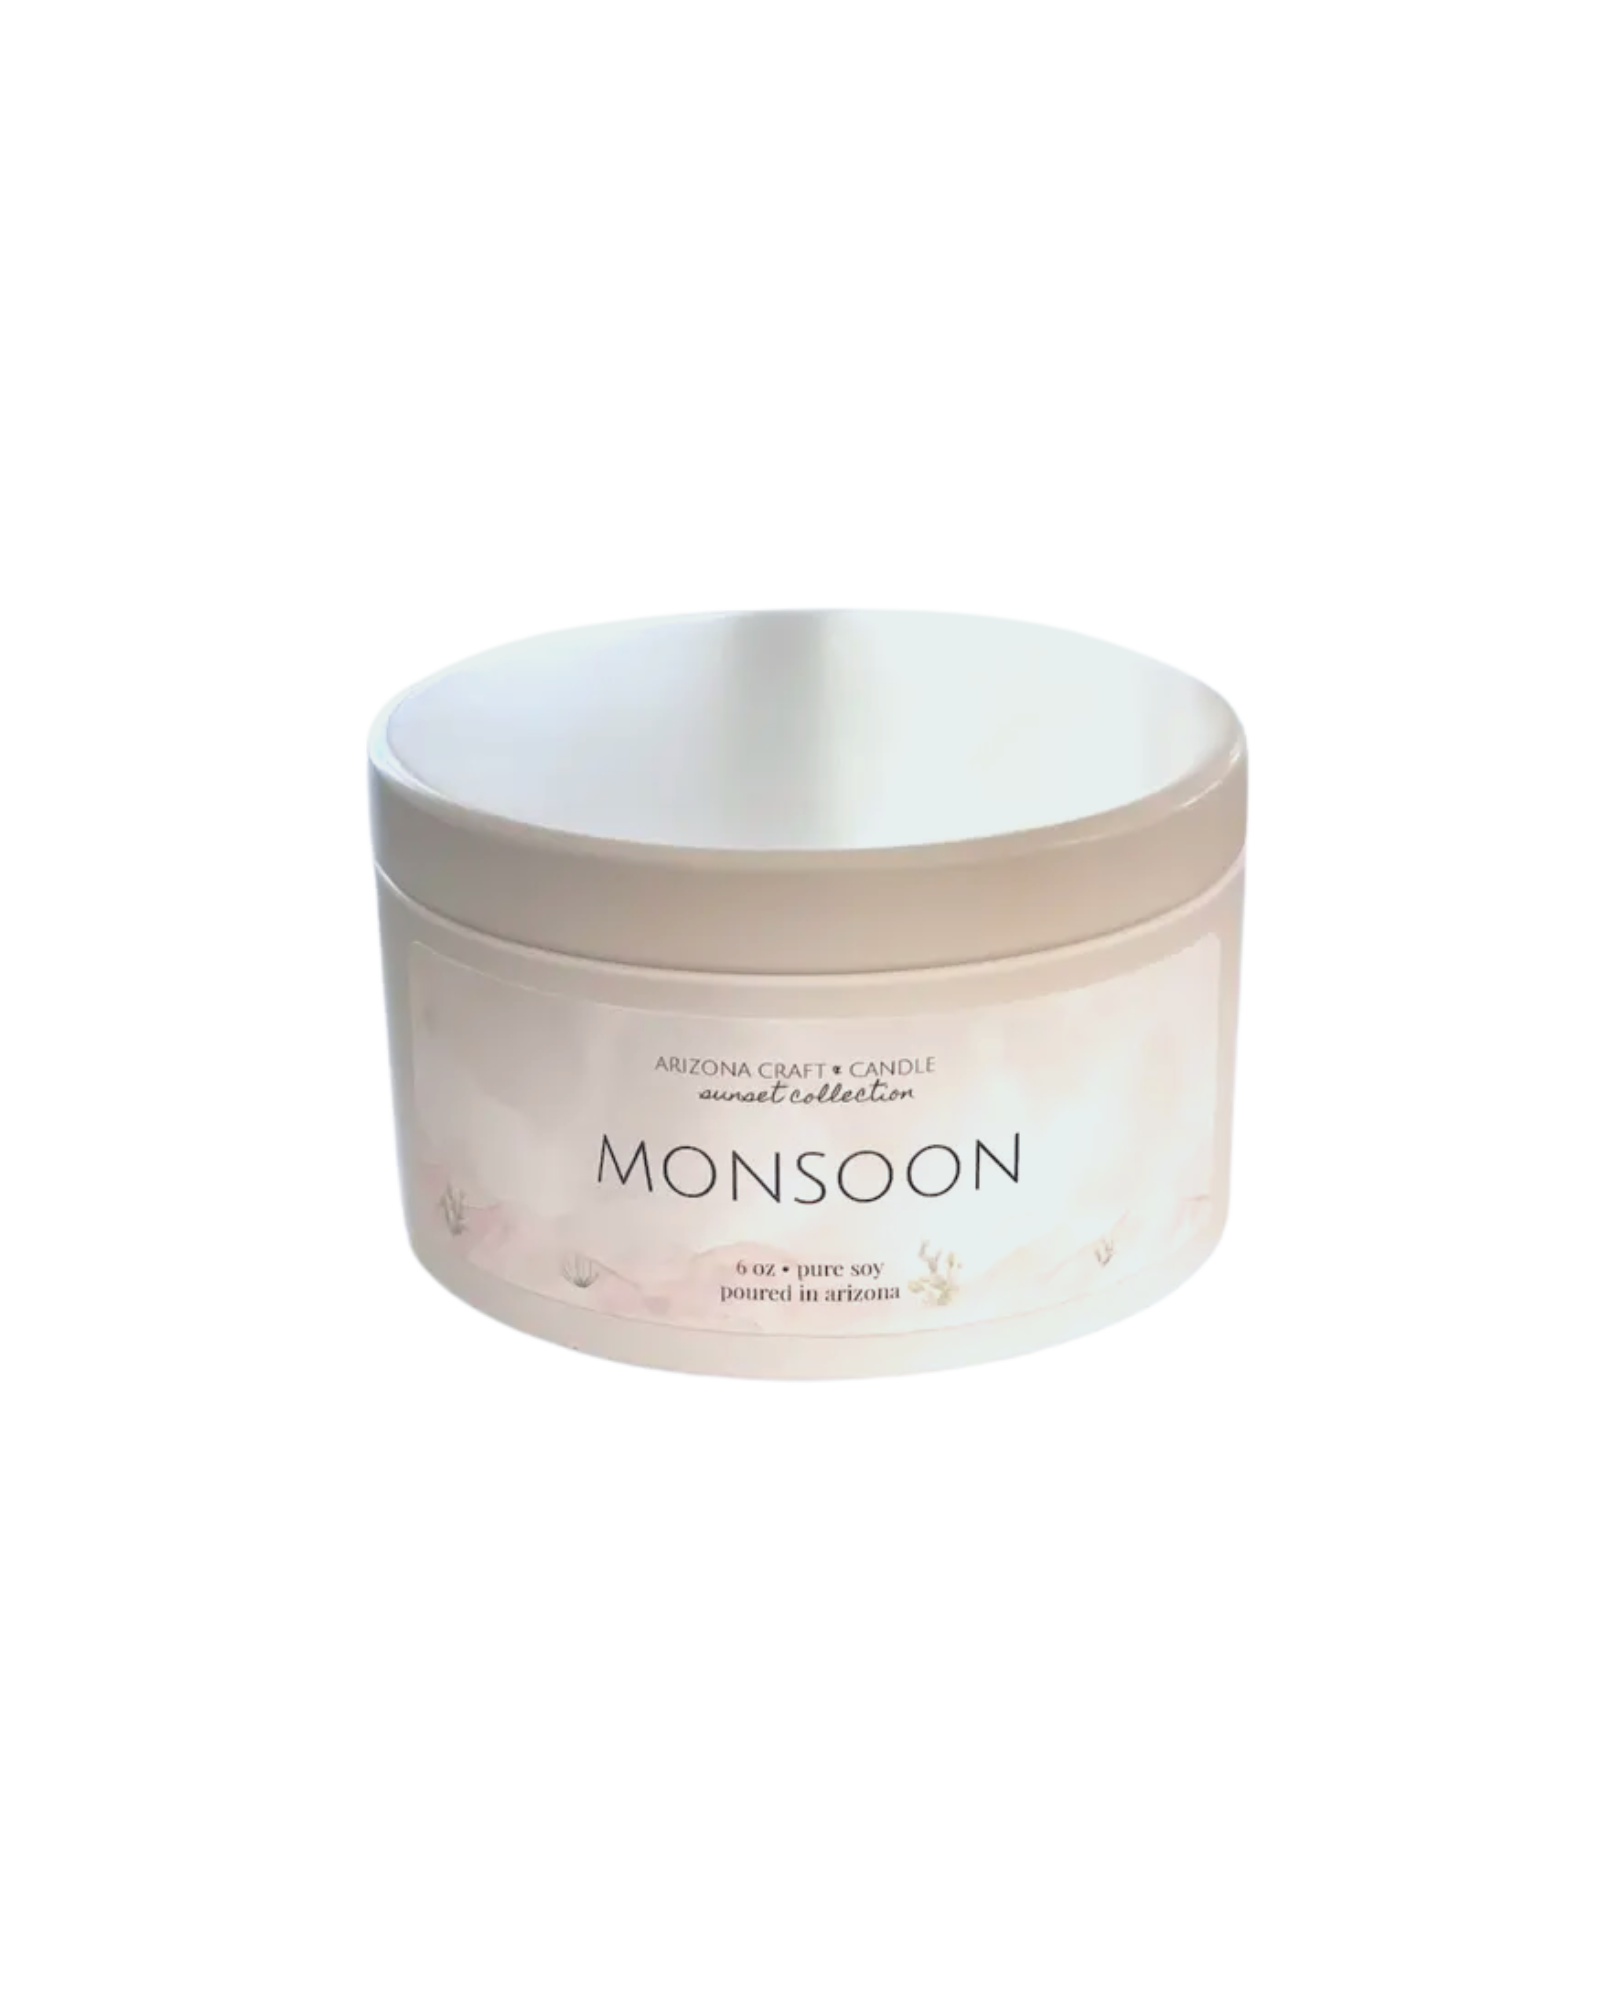 Medium matte white Monsoon candle tin with a desert landscape label